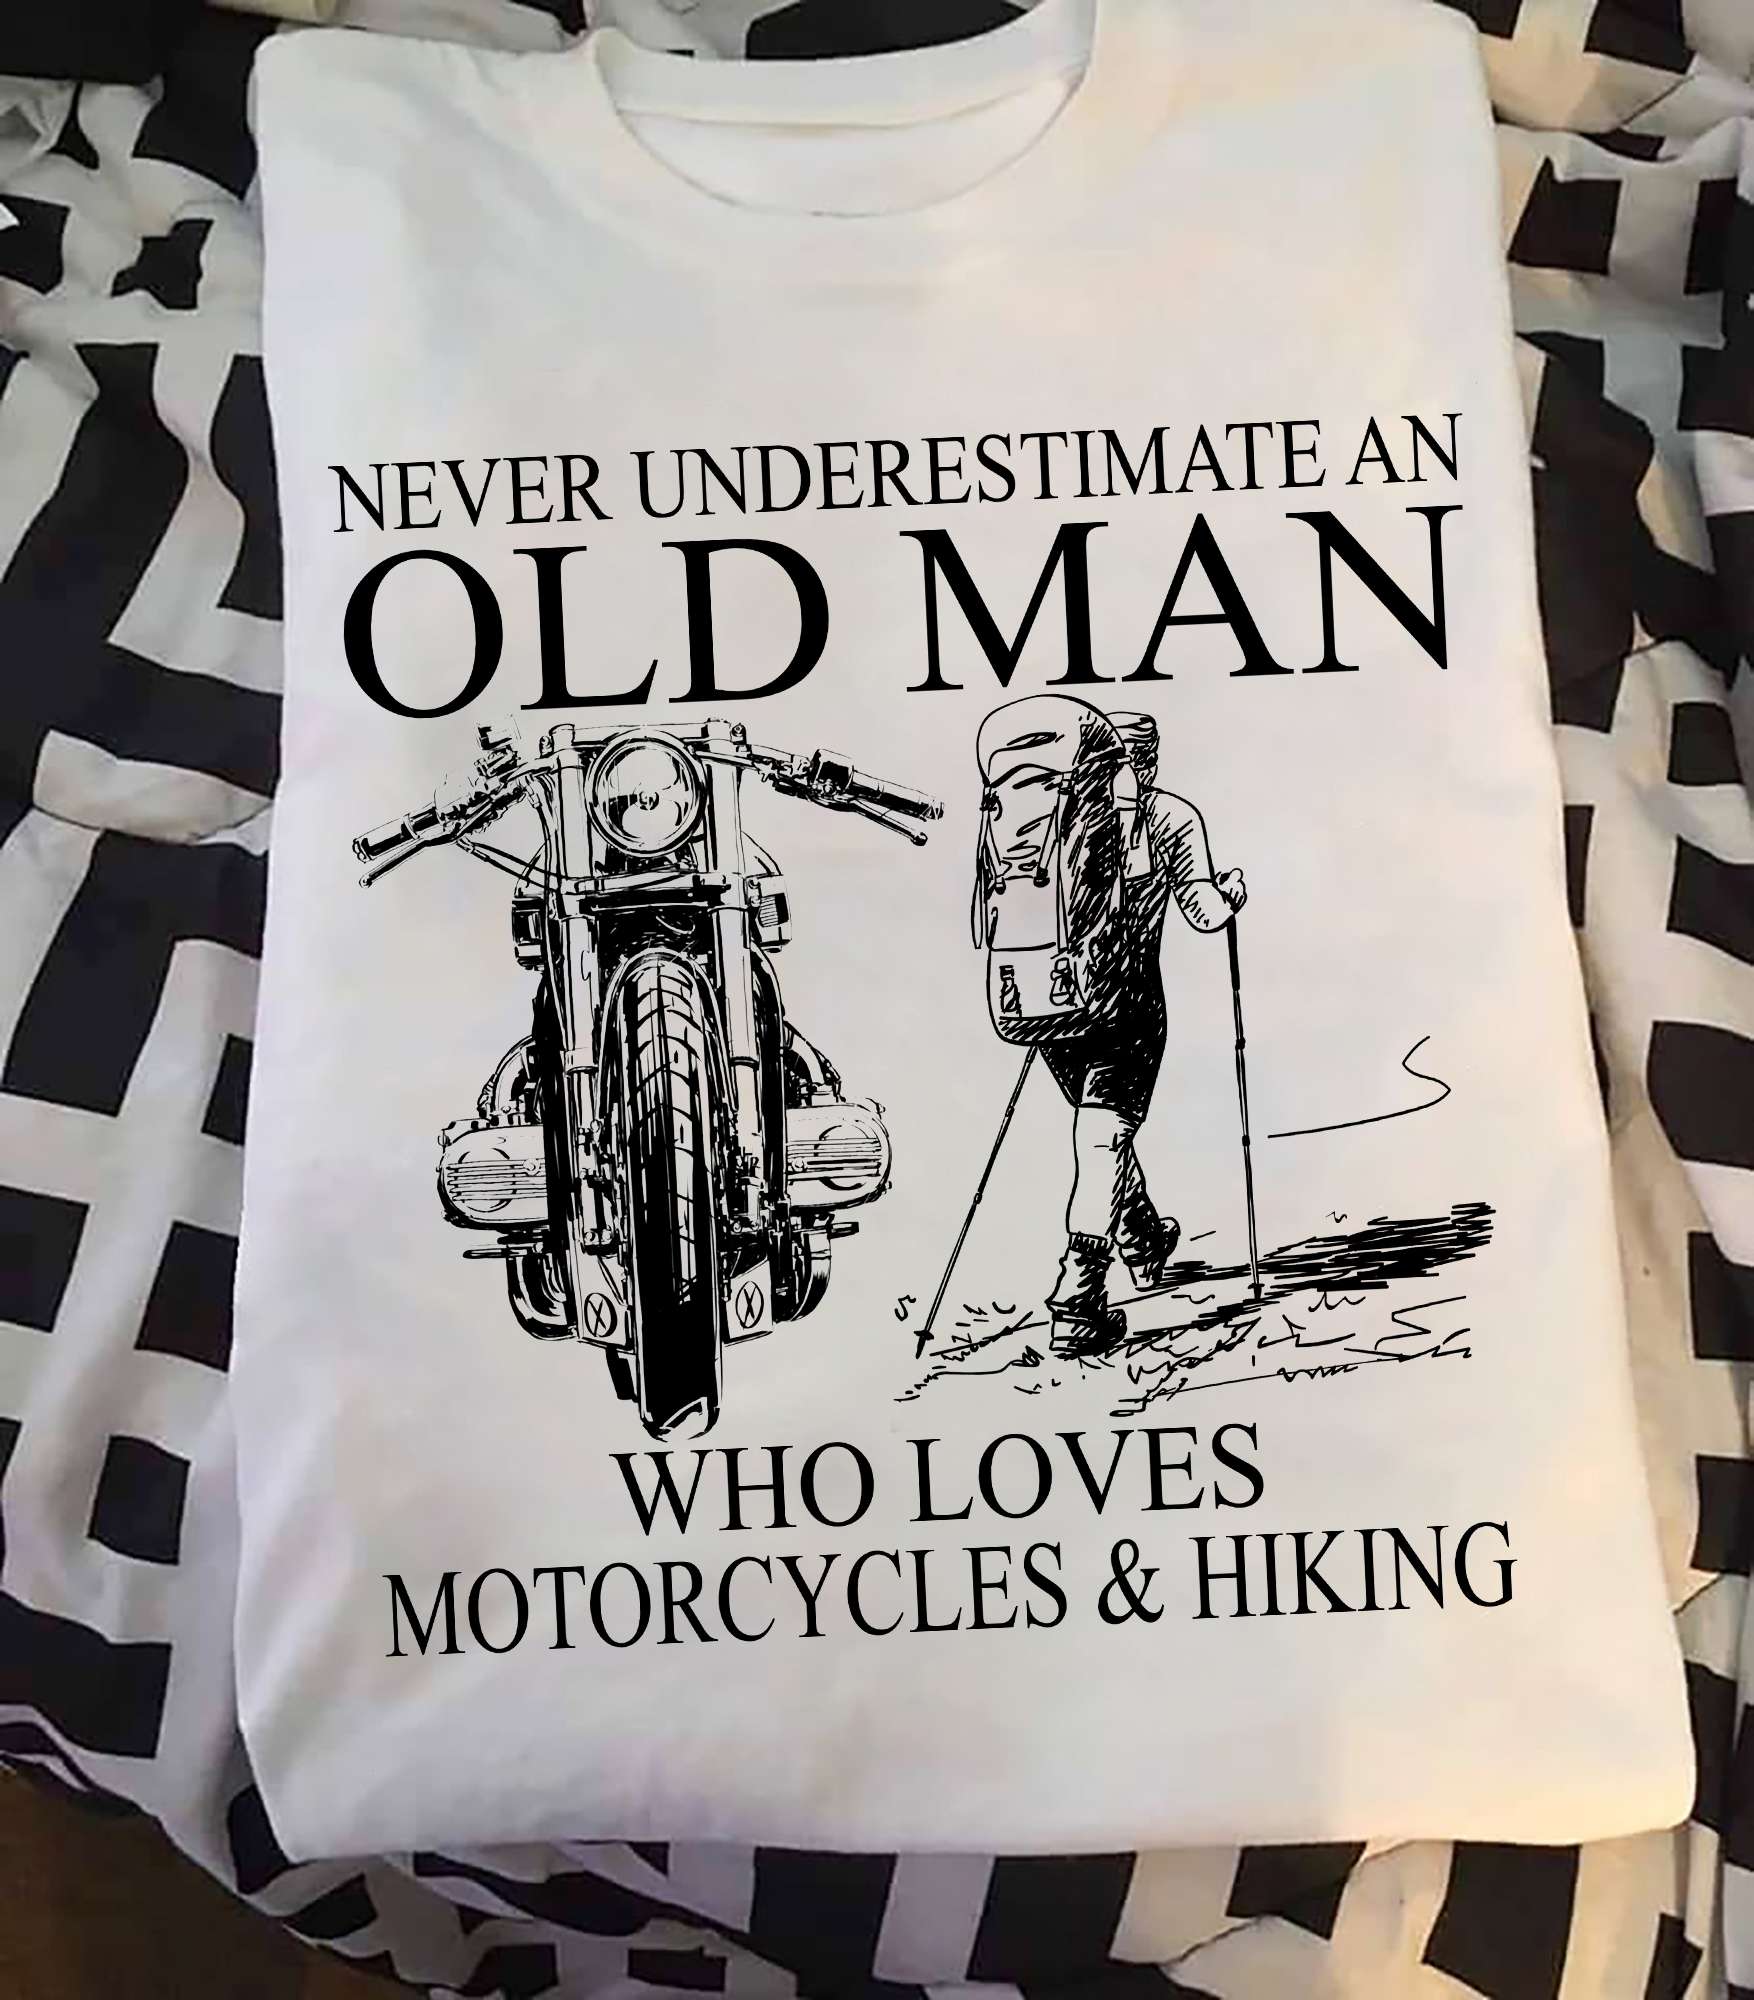 Never underestimate an old man who loves motorcycles and hiking - Old man hiking